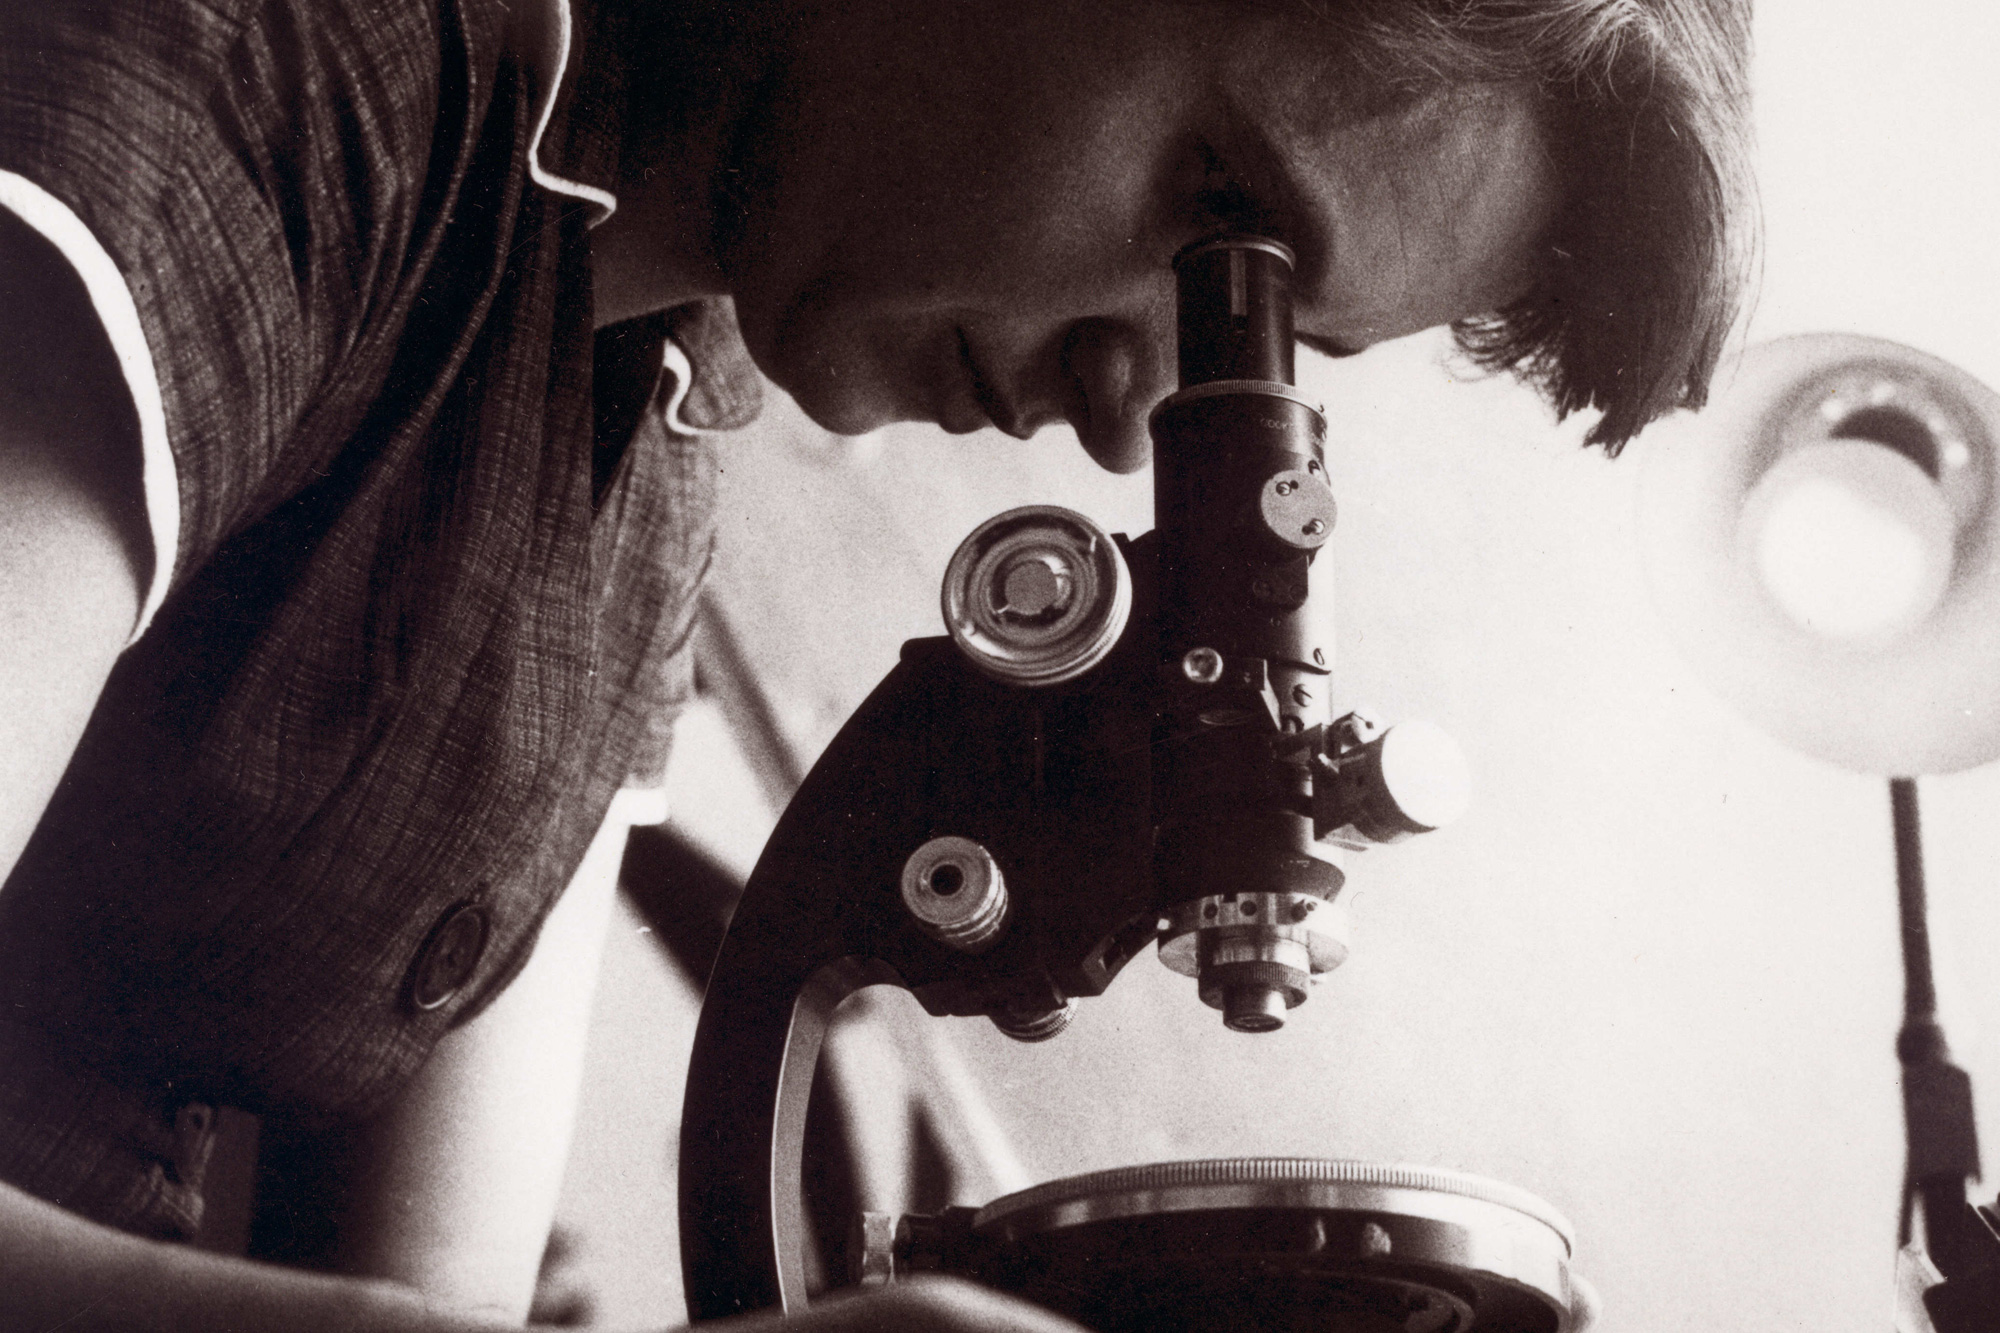 "Science and everyday life cannot and should not be separated." DNA Discoverer Rosalind Franklin's Rules of Life